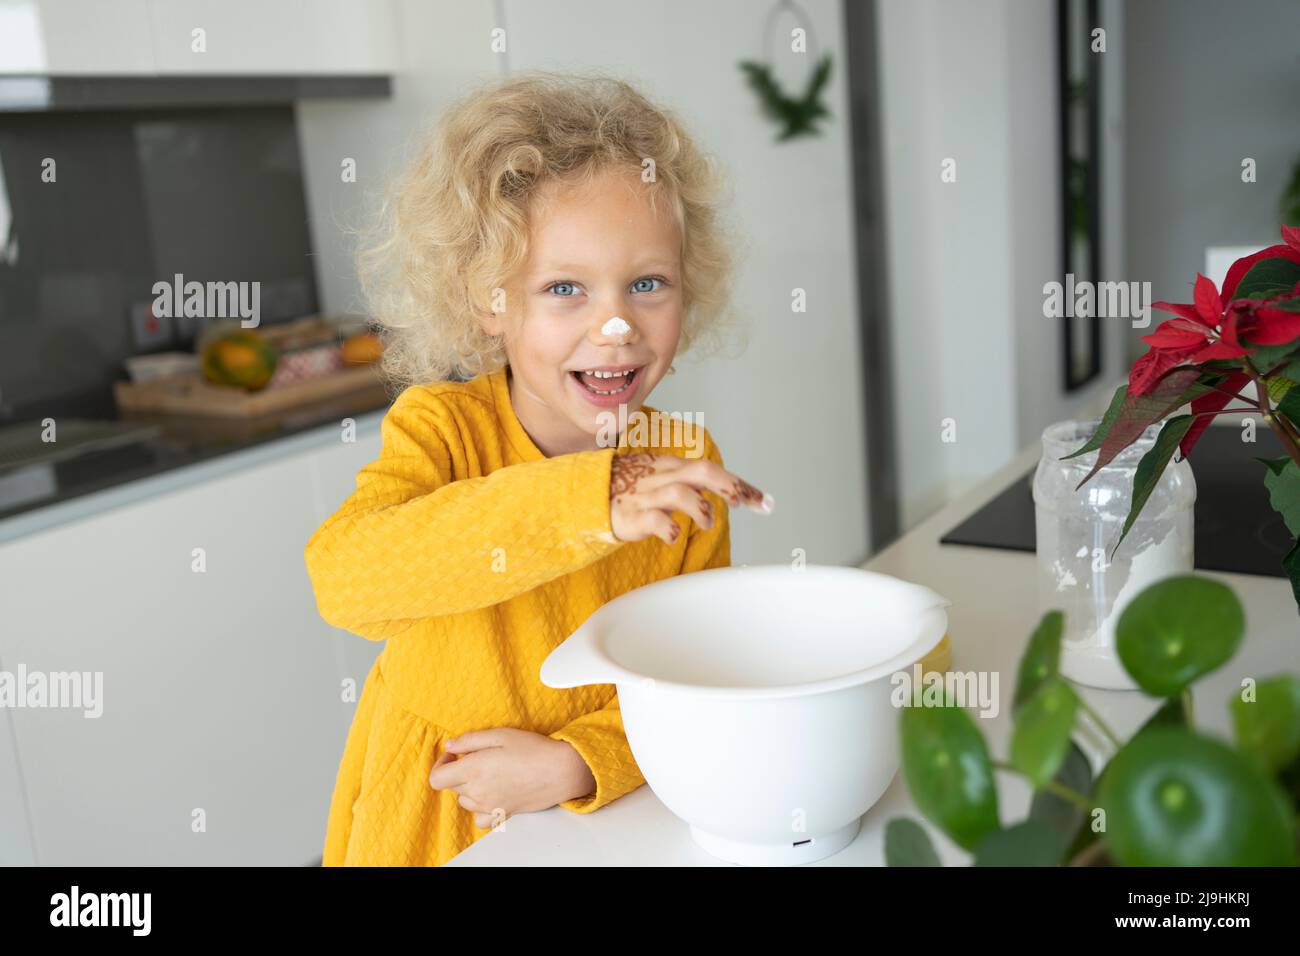 Happy blond girl with bowl standing at kitchen island Stock Photo